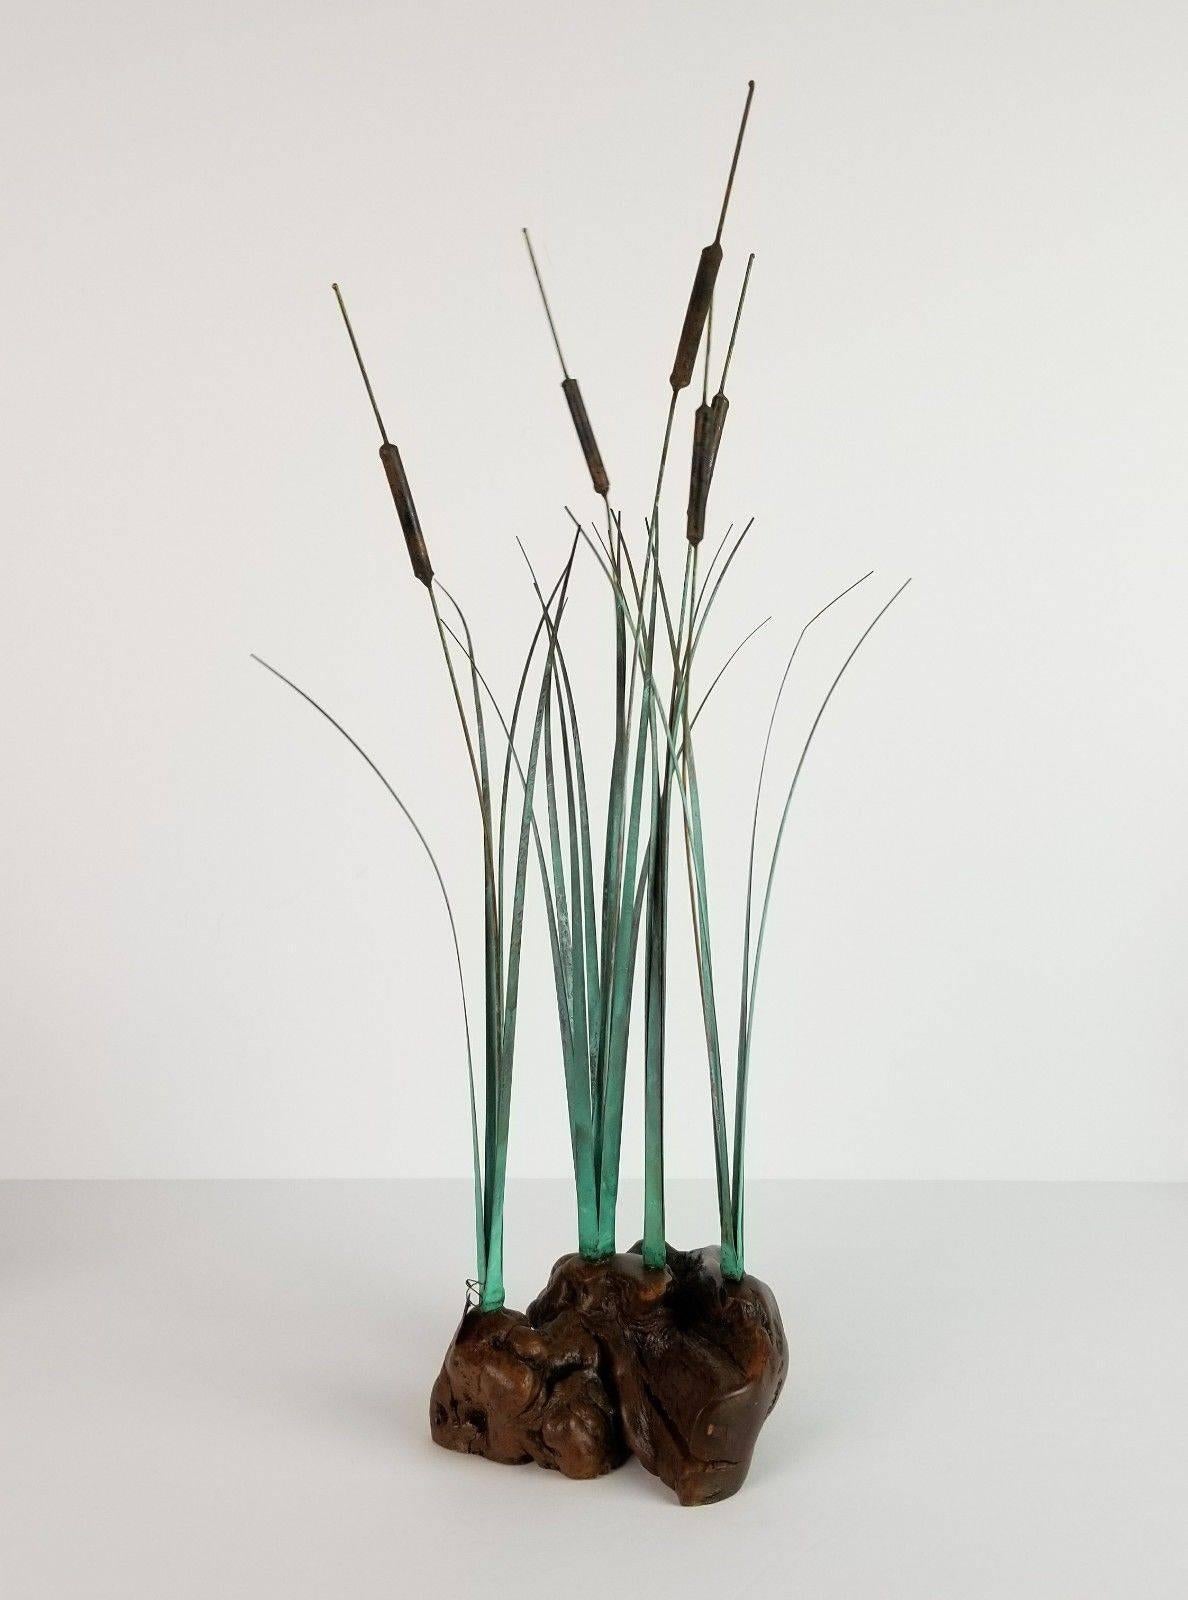 20th Century Midcentury Metal and Wood Cattail Sculpture by Max Howard